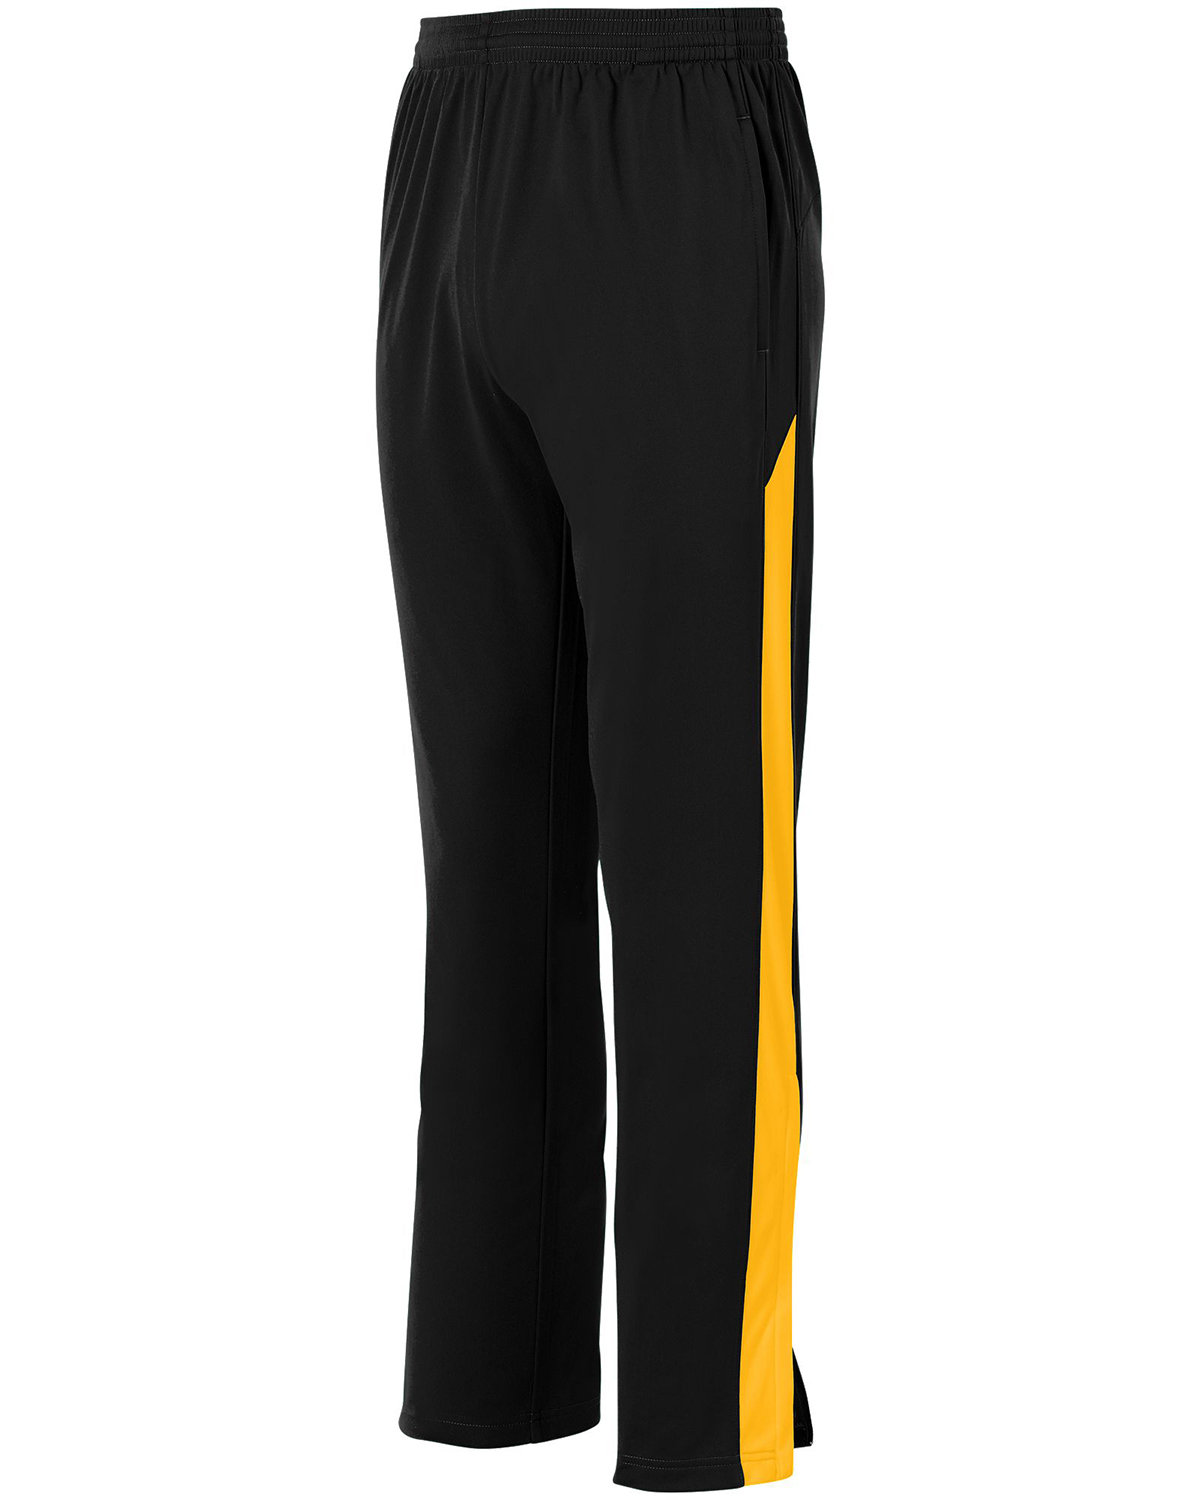 Front view of Youth Medalist 2.0 Pant